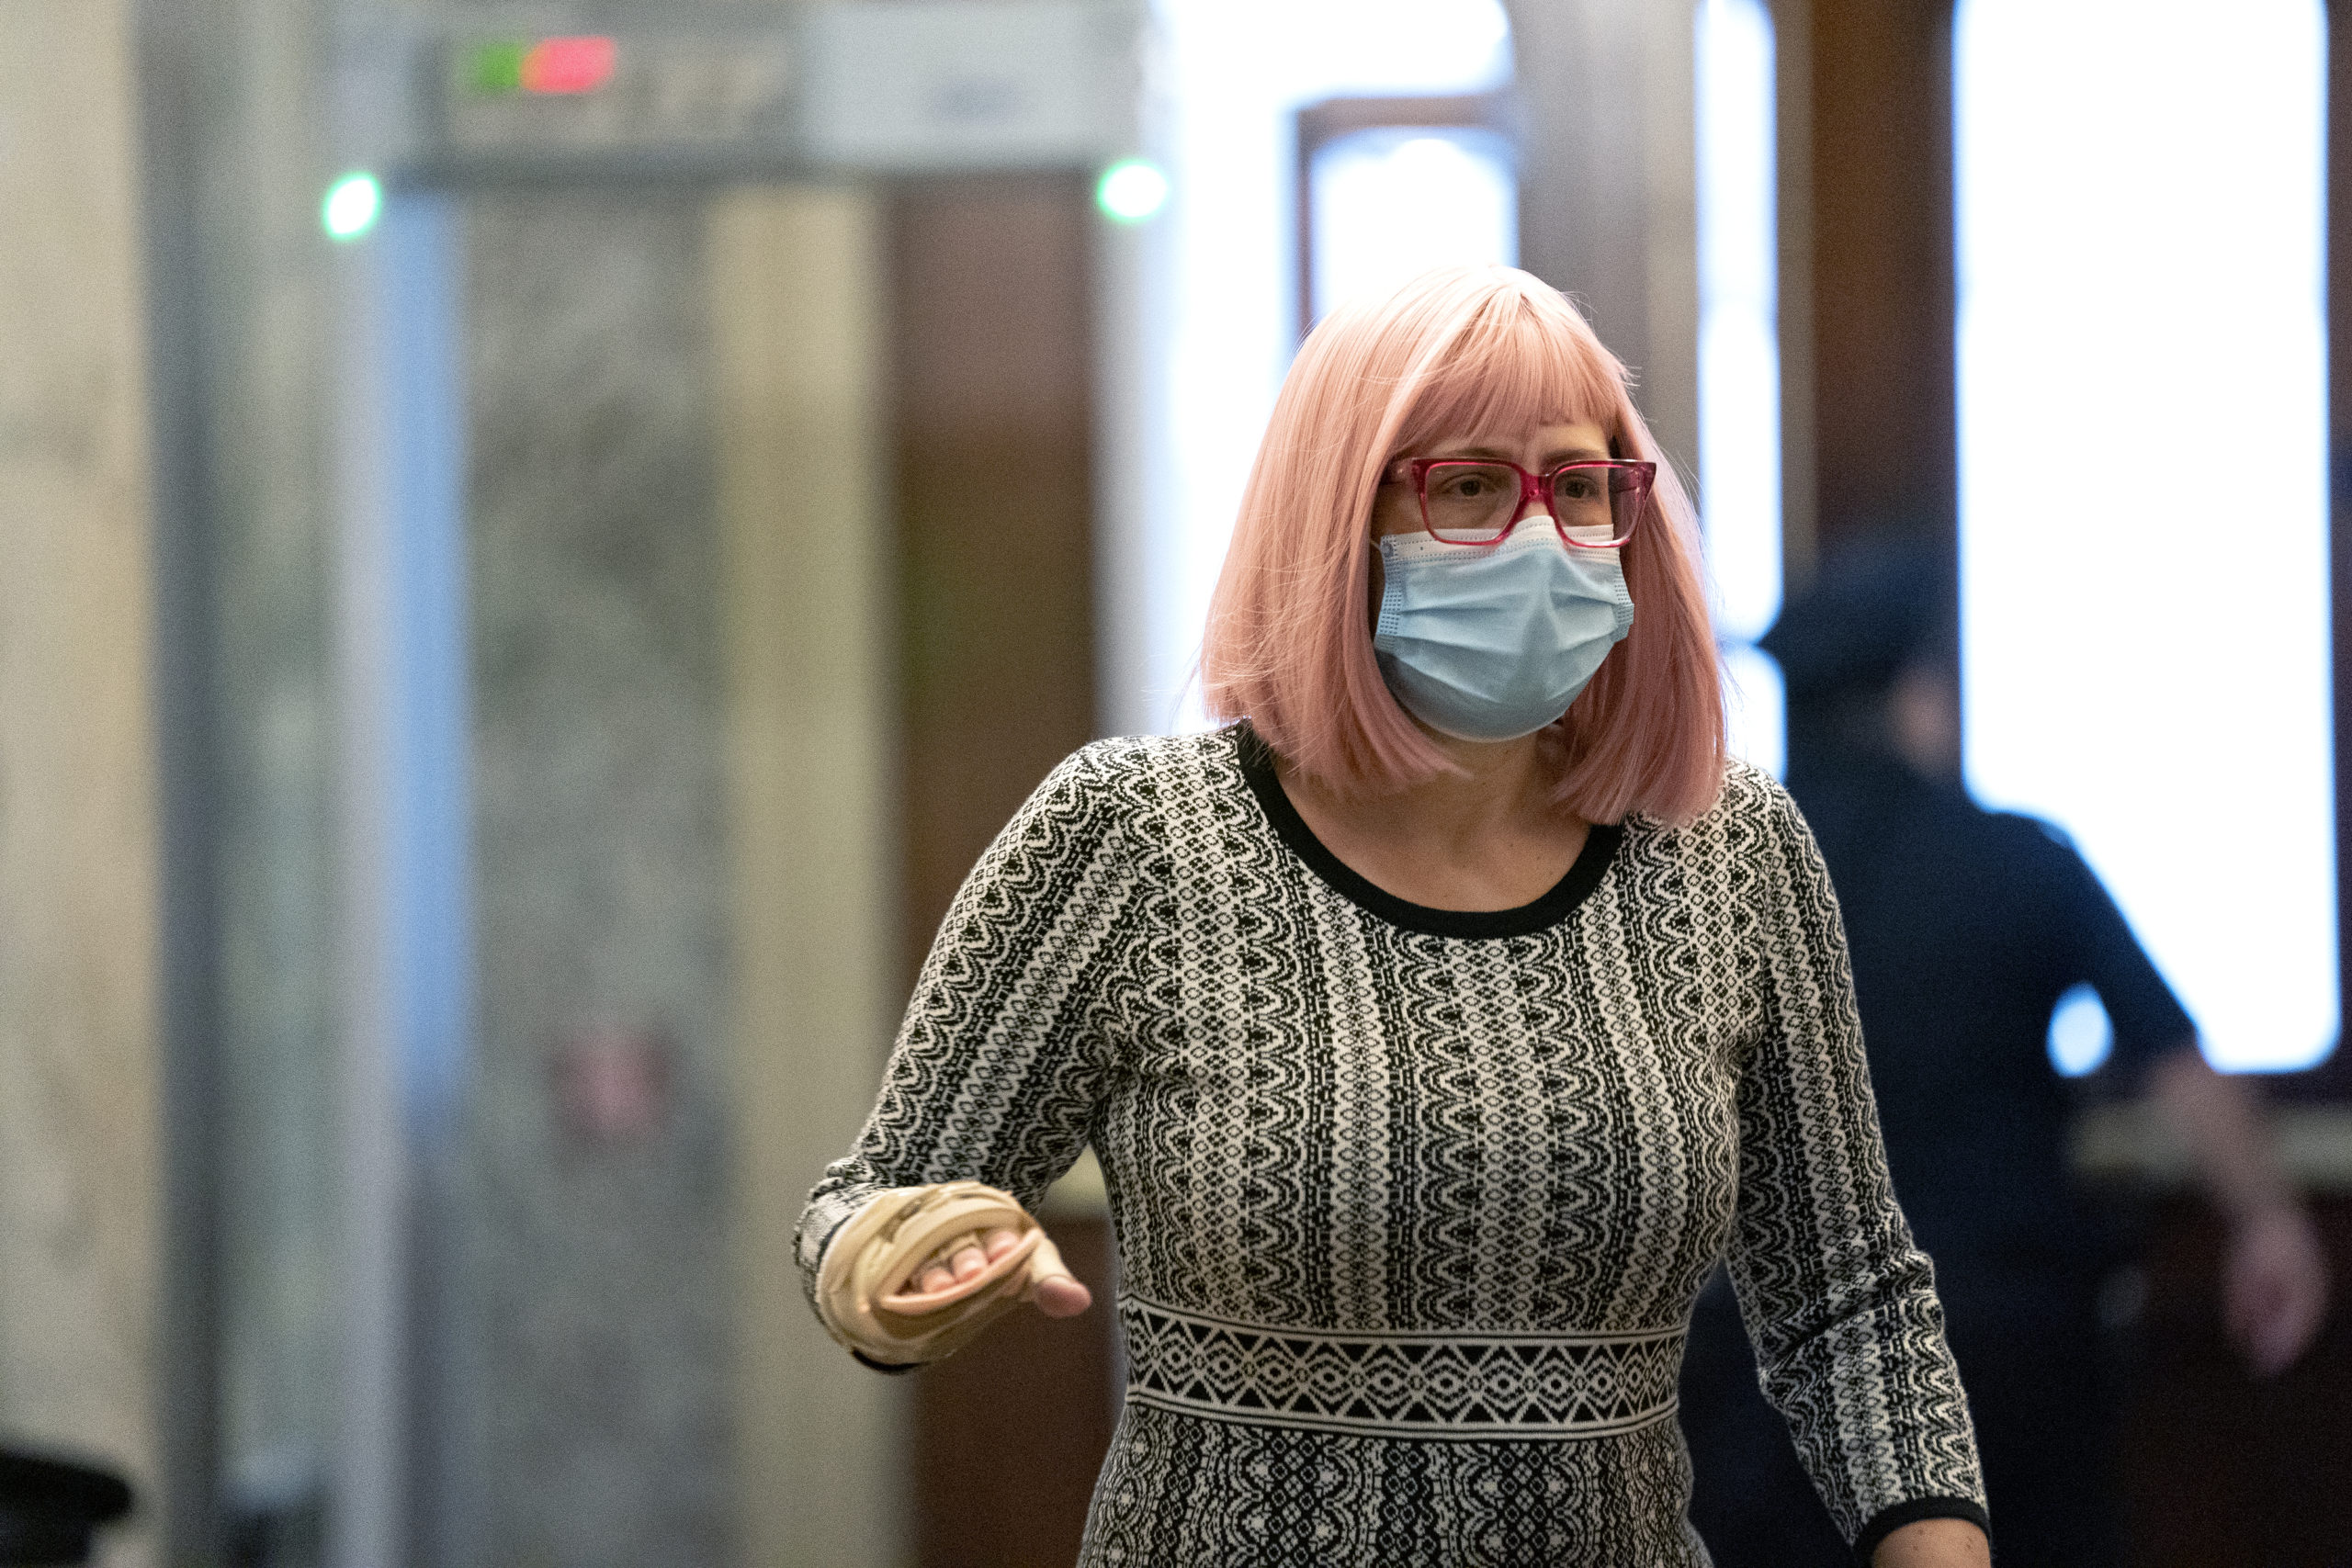 WASHINGTON, DC - DECEMBER 11: U.S. Sen. Kyrsten Sinema (D-AZ) wears a protective mask while arriving to the U.S. Capitol on December 11, 2020 in Washington, DC. Lawmakers are facing a midnight deadline to pass a continuing resolution to avert a partial shutdown and fund the government for another week. (Photo by Stefani Reynolds/Getty Images)